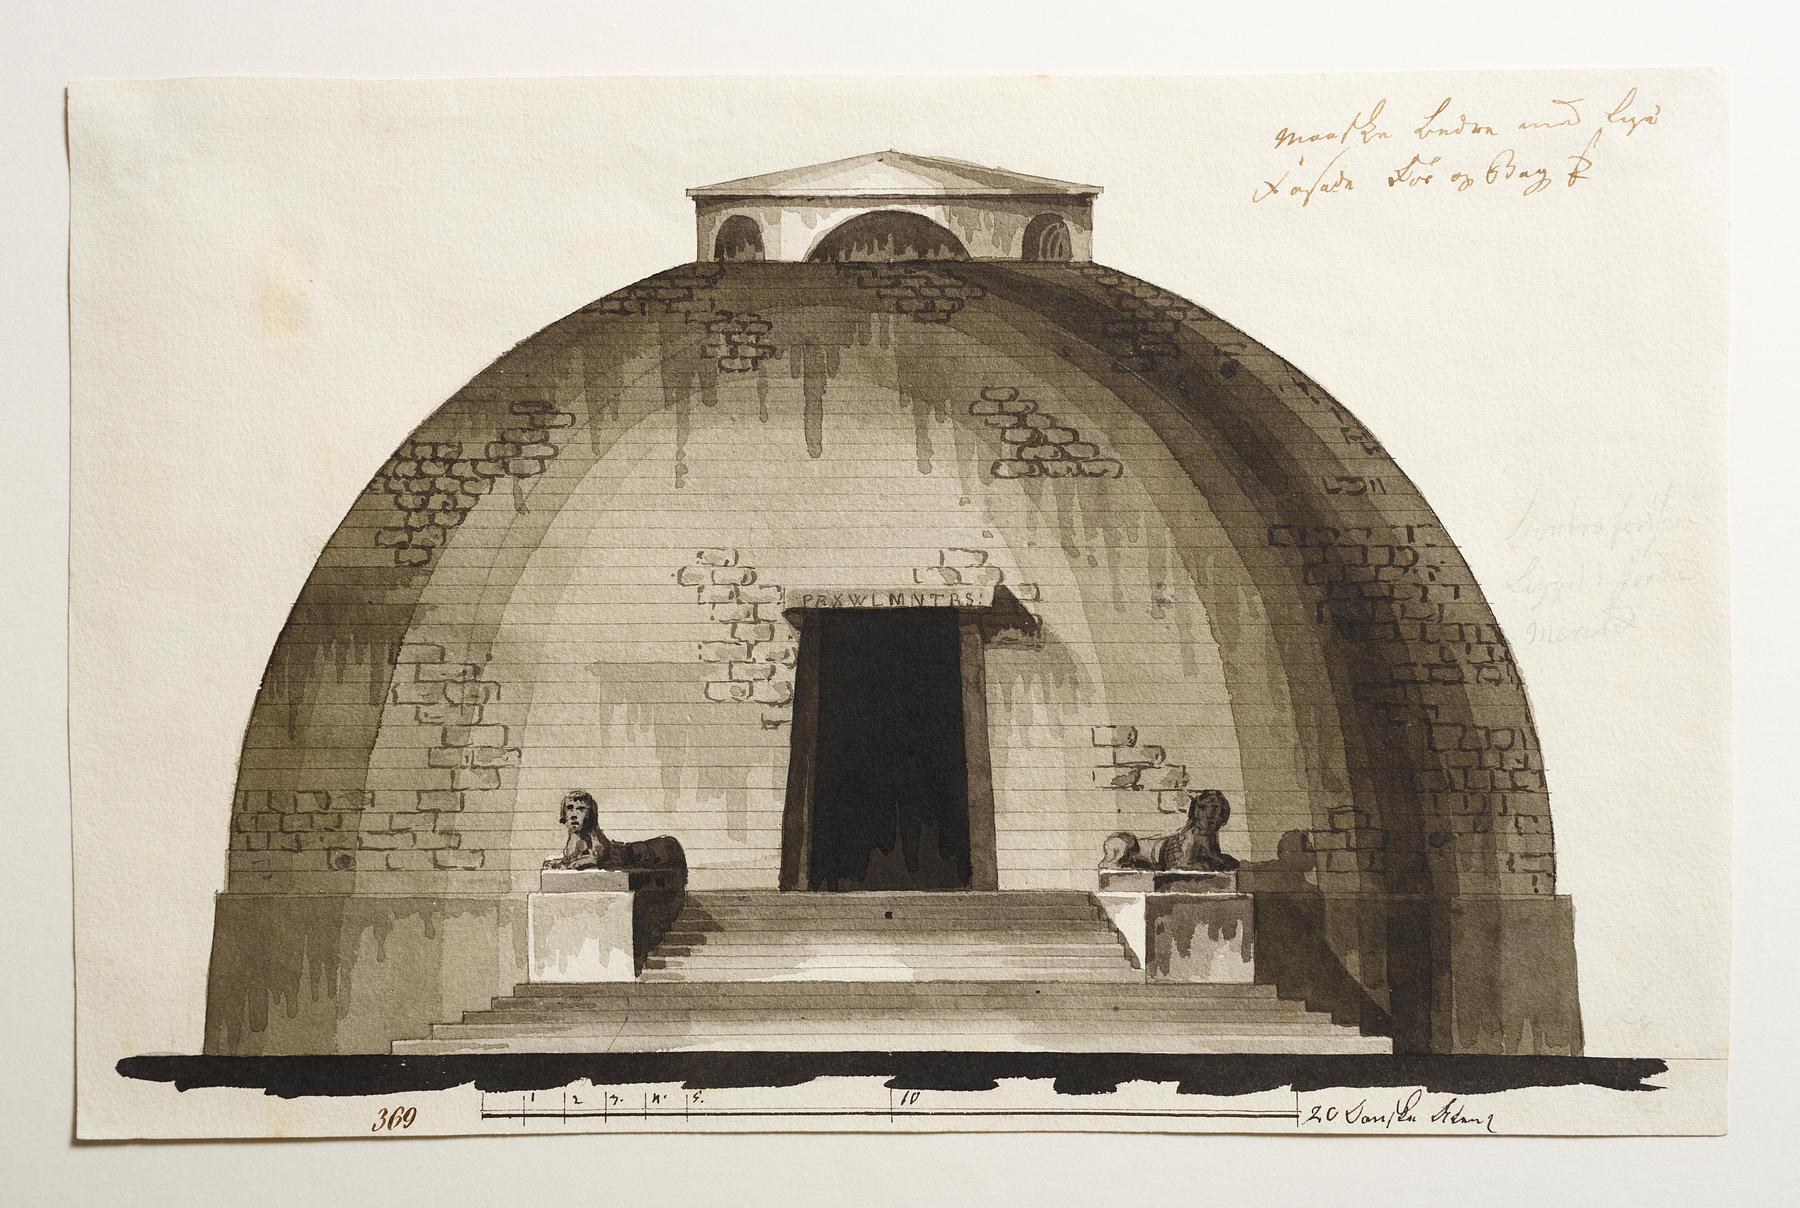 Sketch for a Mausoleum or Sepulchral Chapel in Antique Style, Elevation of Facade, D857